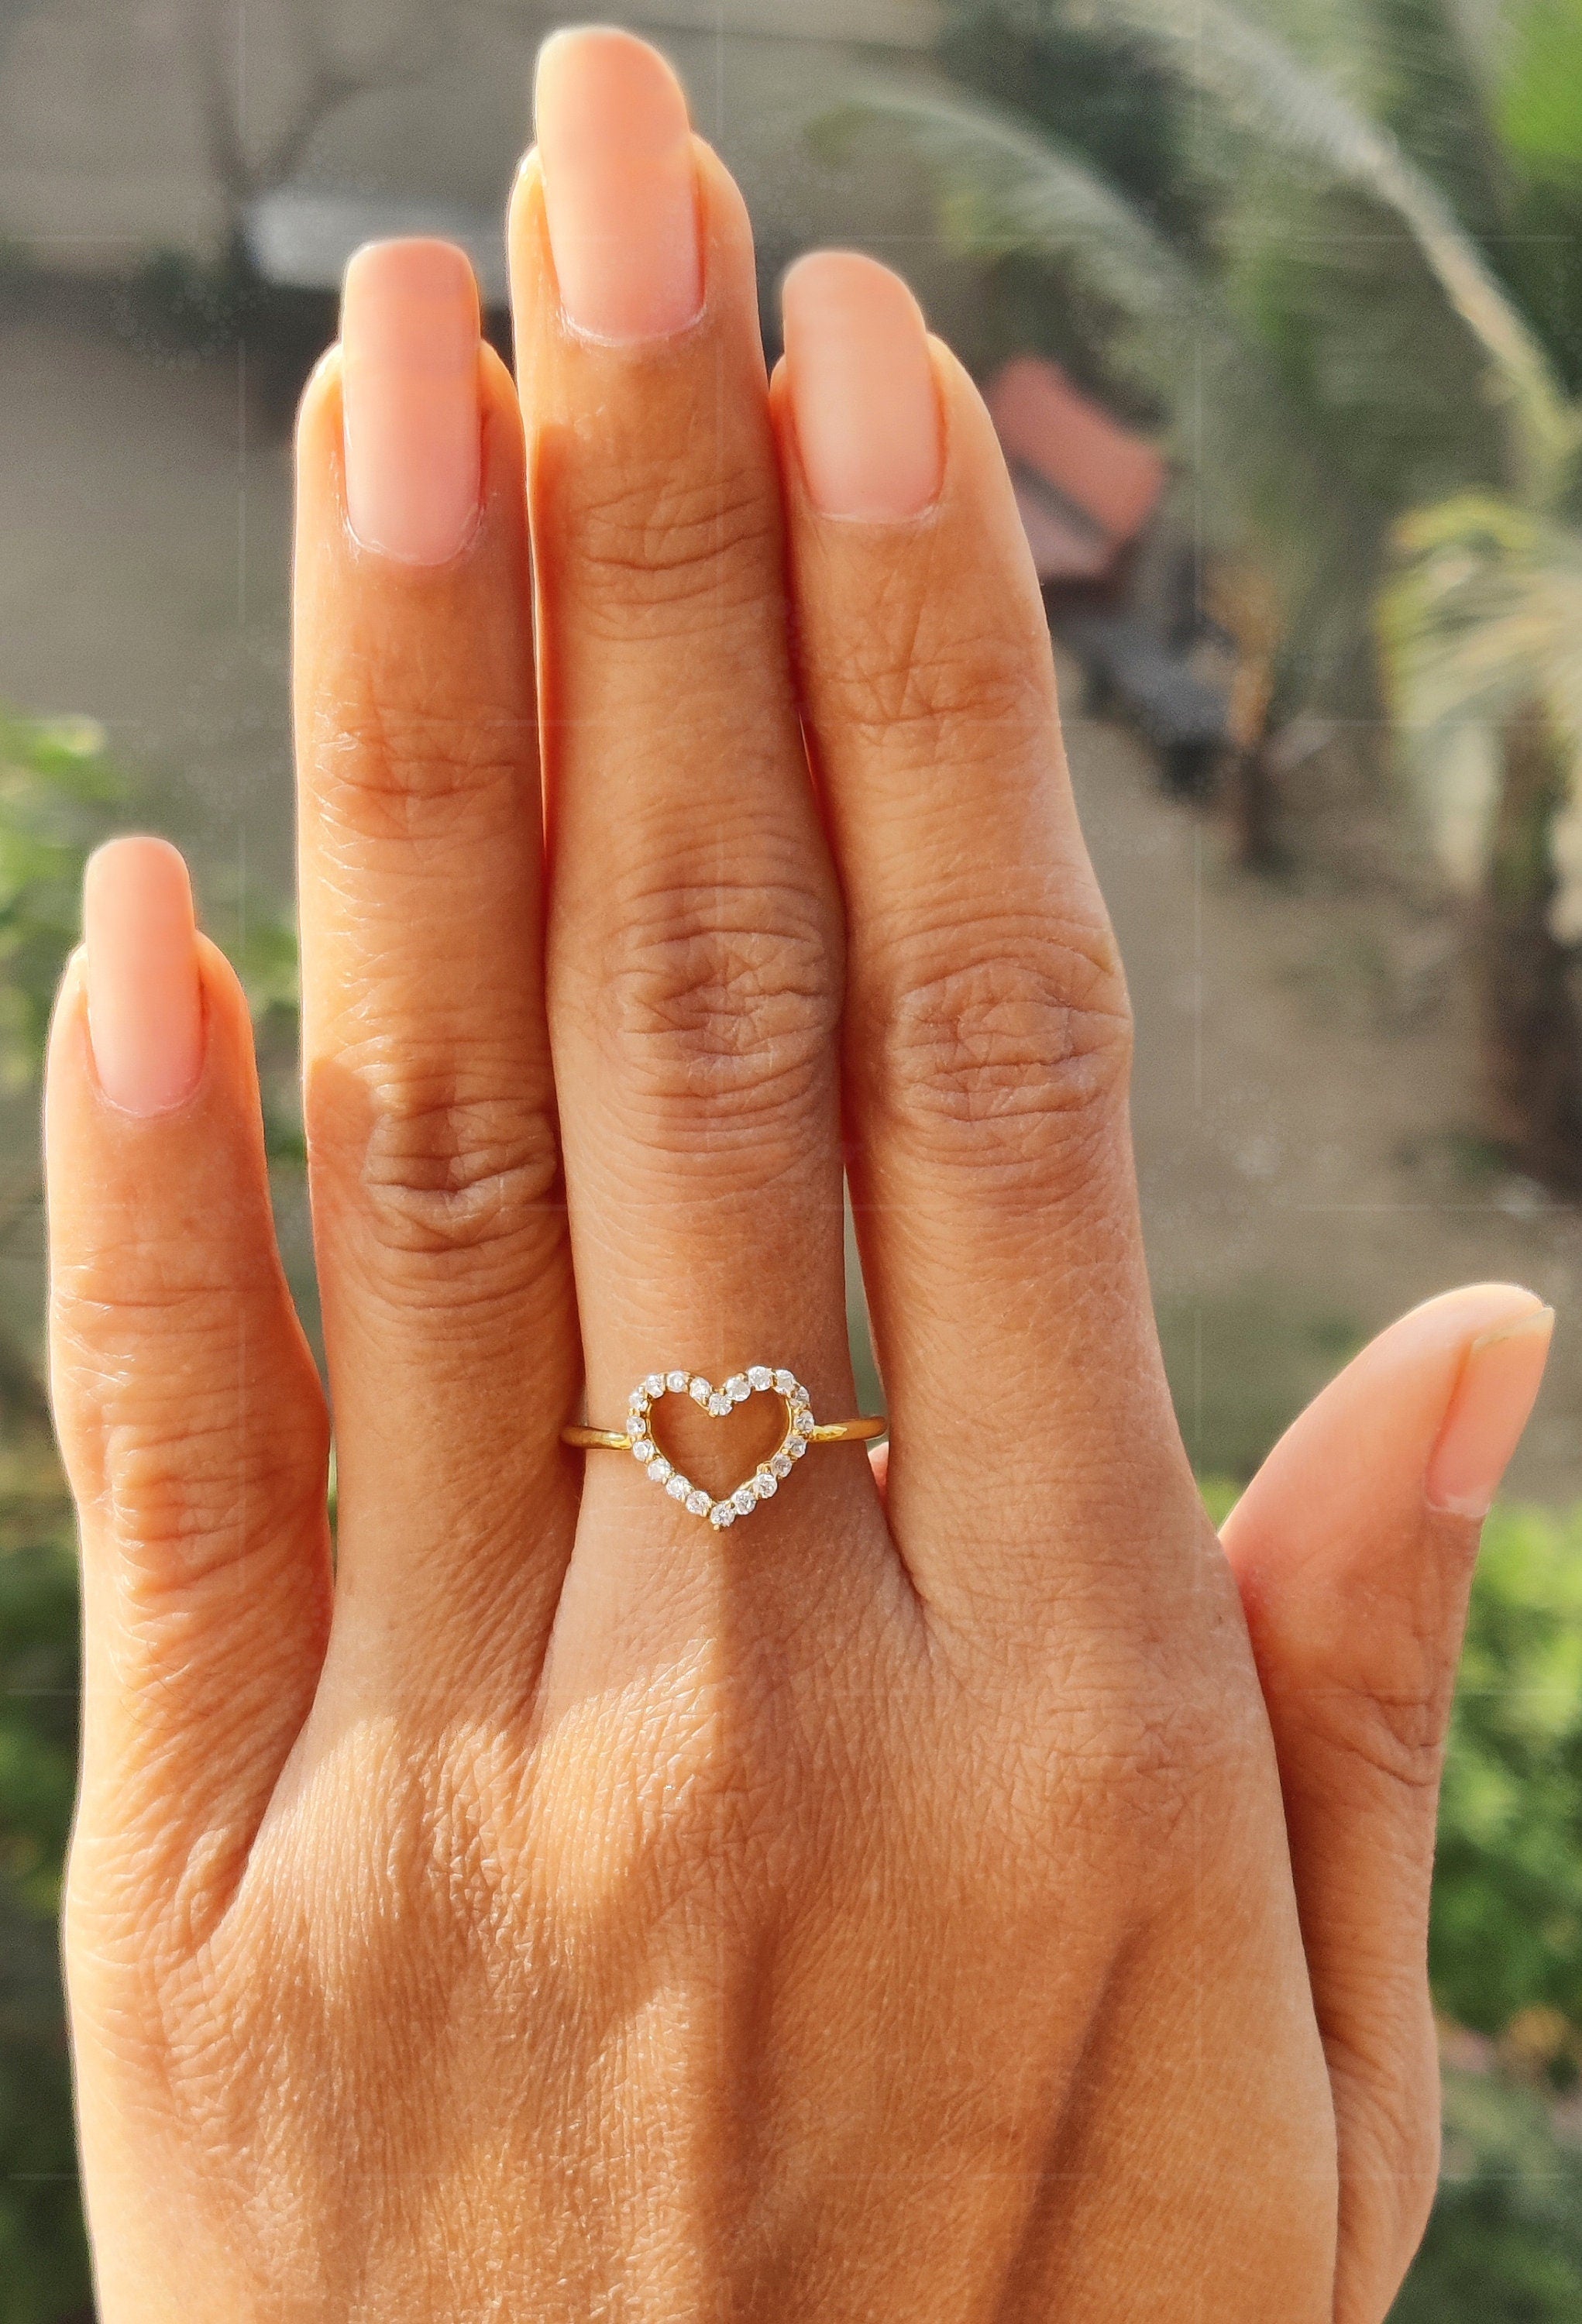 Heartfelt Hollow Heart Ring: Silver and Gold Moissanite Love in a Dainty Design